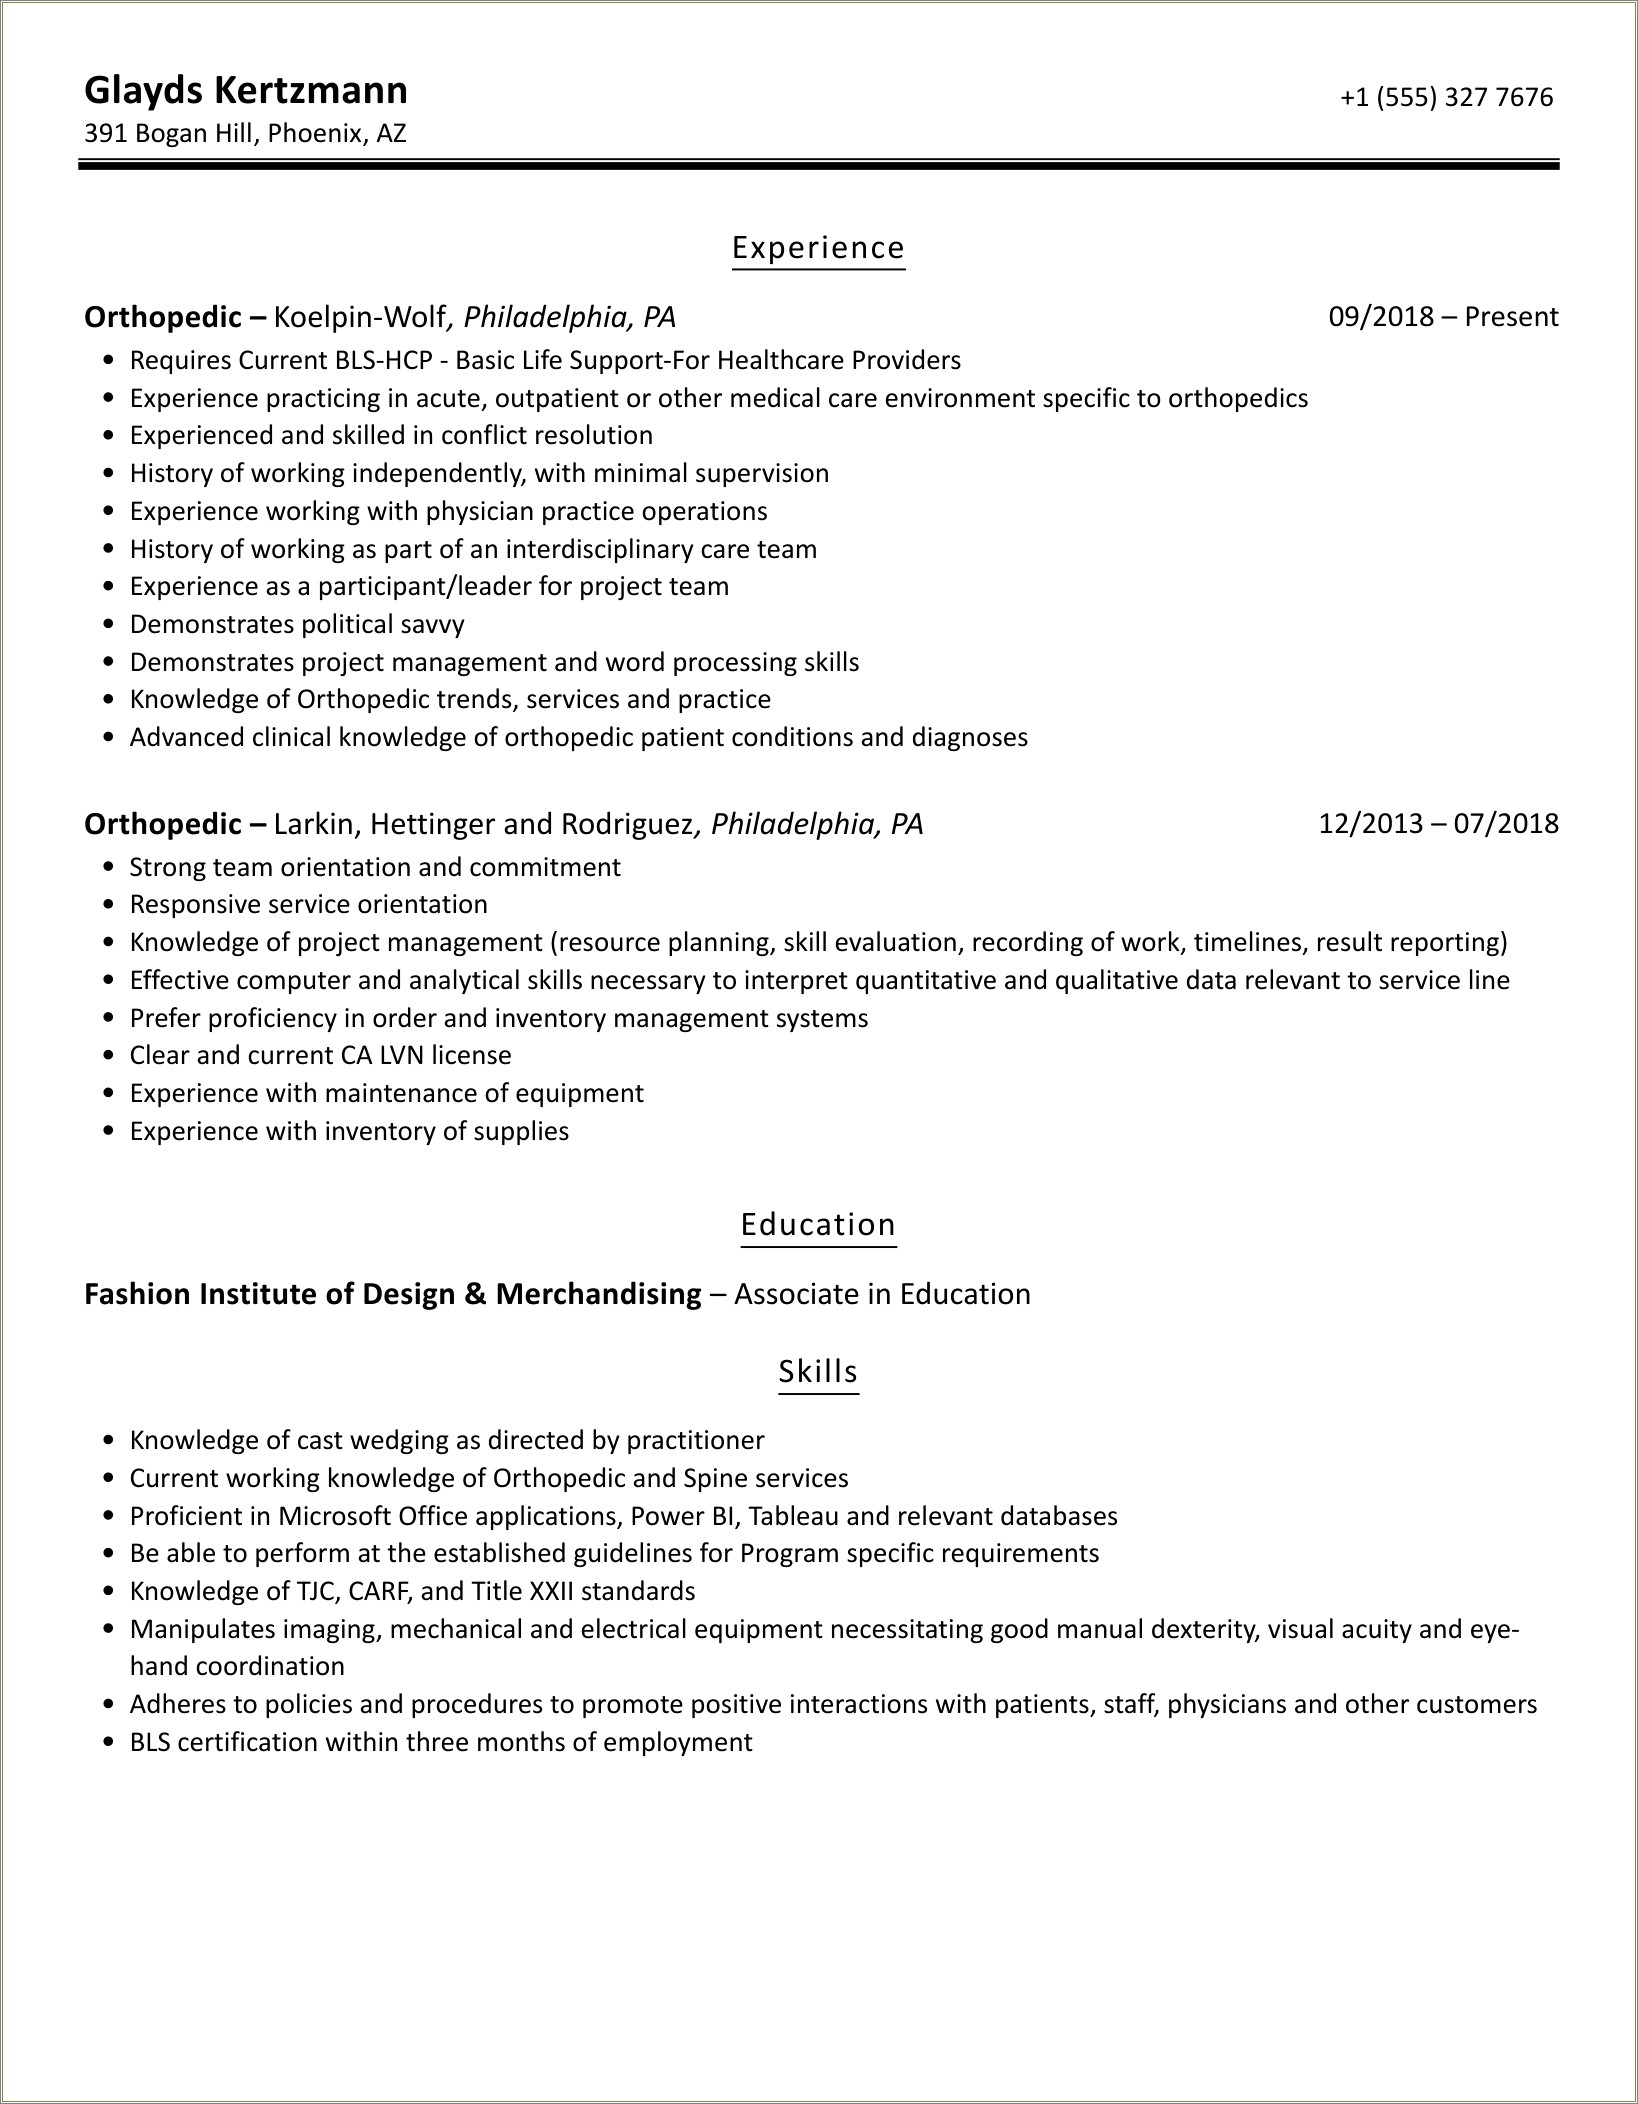 Resume Objective For Orthopedic Manager To Fashion Companies